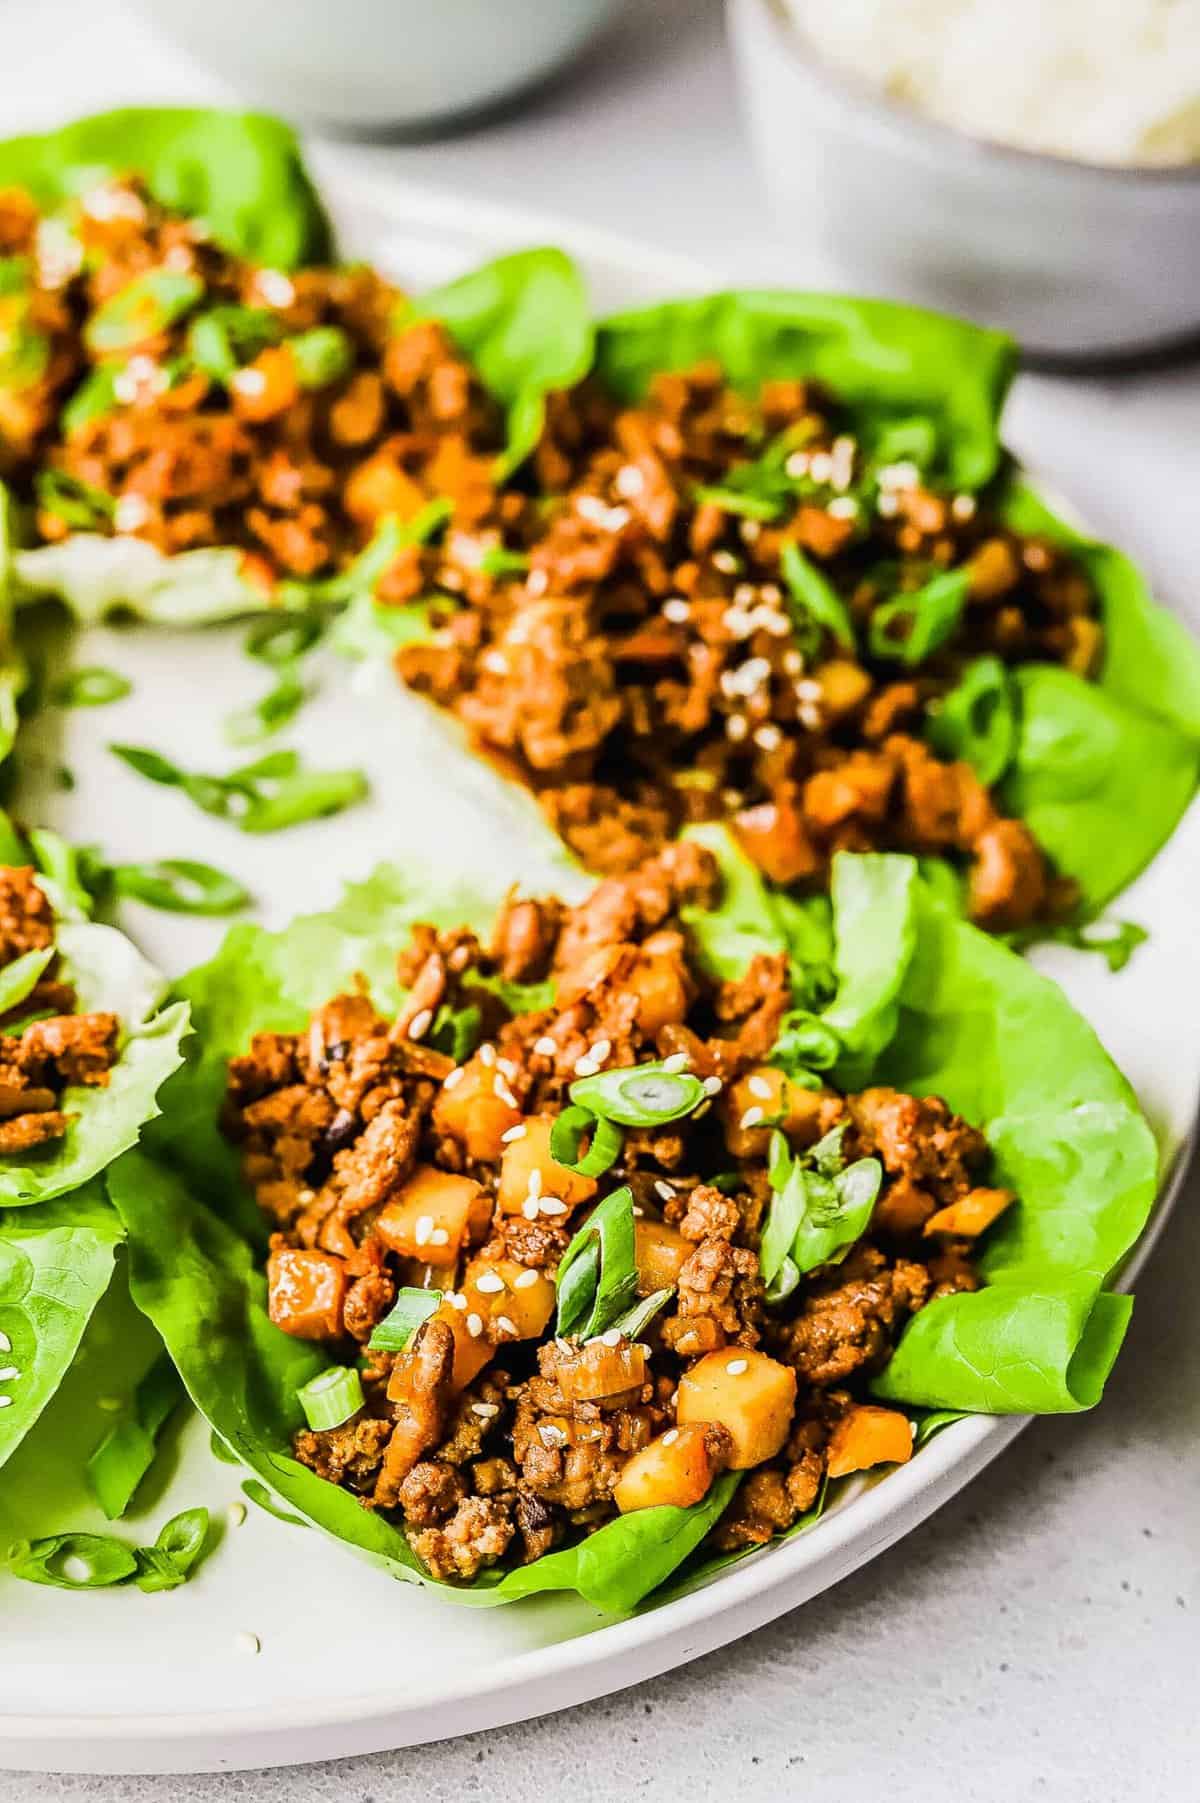 Lettuce wraps with ground chicken, mushrooms, and water chestnuts.